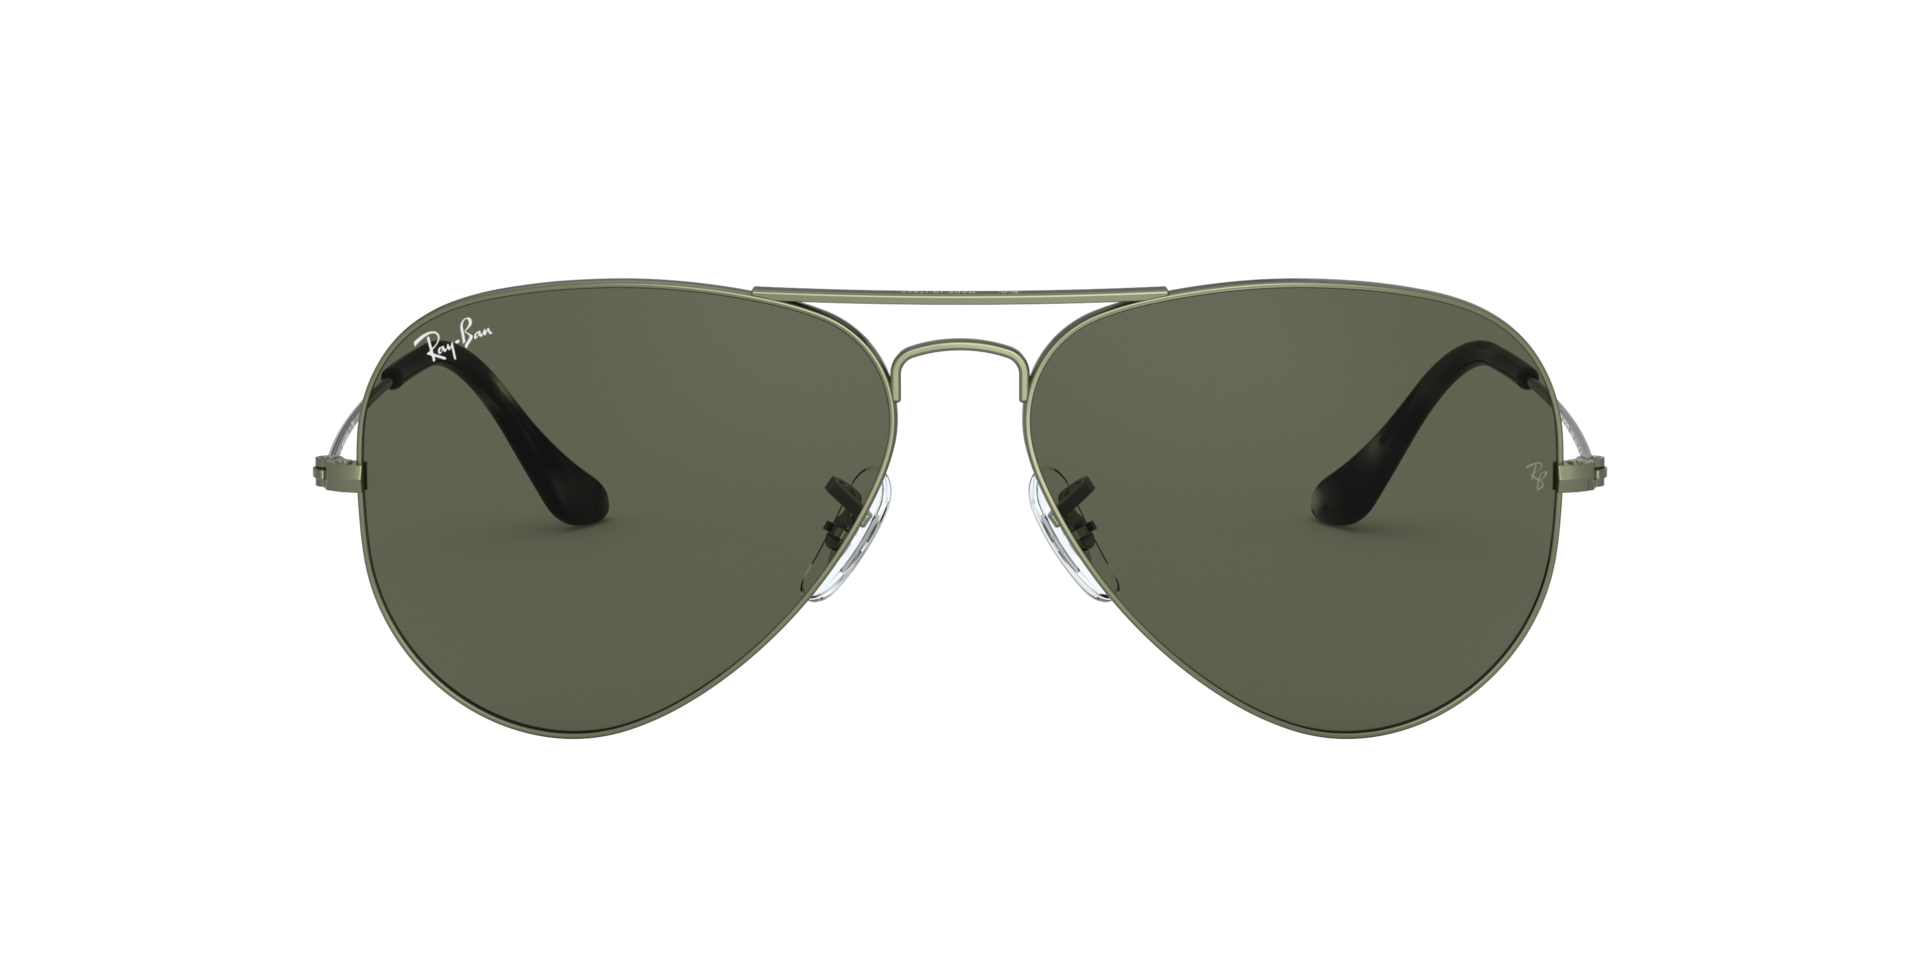 High Quality Replica Sunglasses | Buy First copy replica watches online in  Cash on delivery